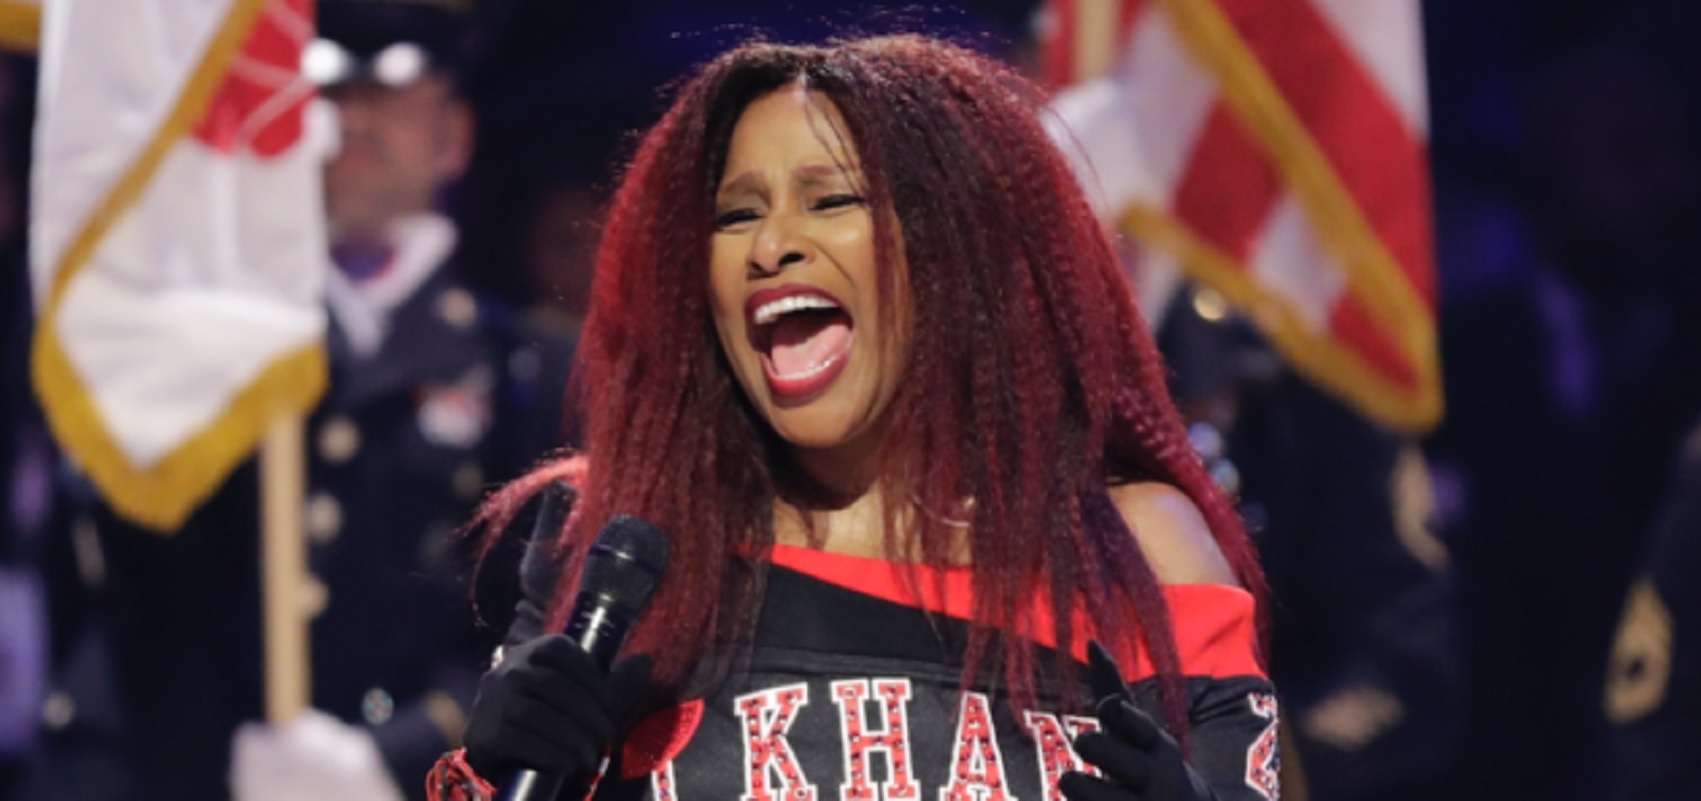 Chaka Khan Trolled For Her “Experimental” Rendition Of Star Spangled Banner at NBA All-Star-Game